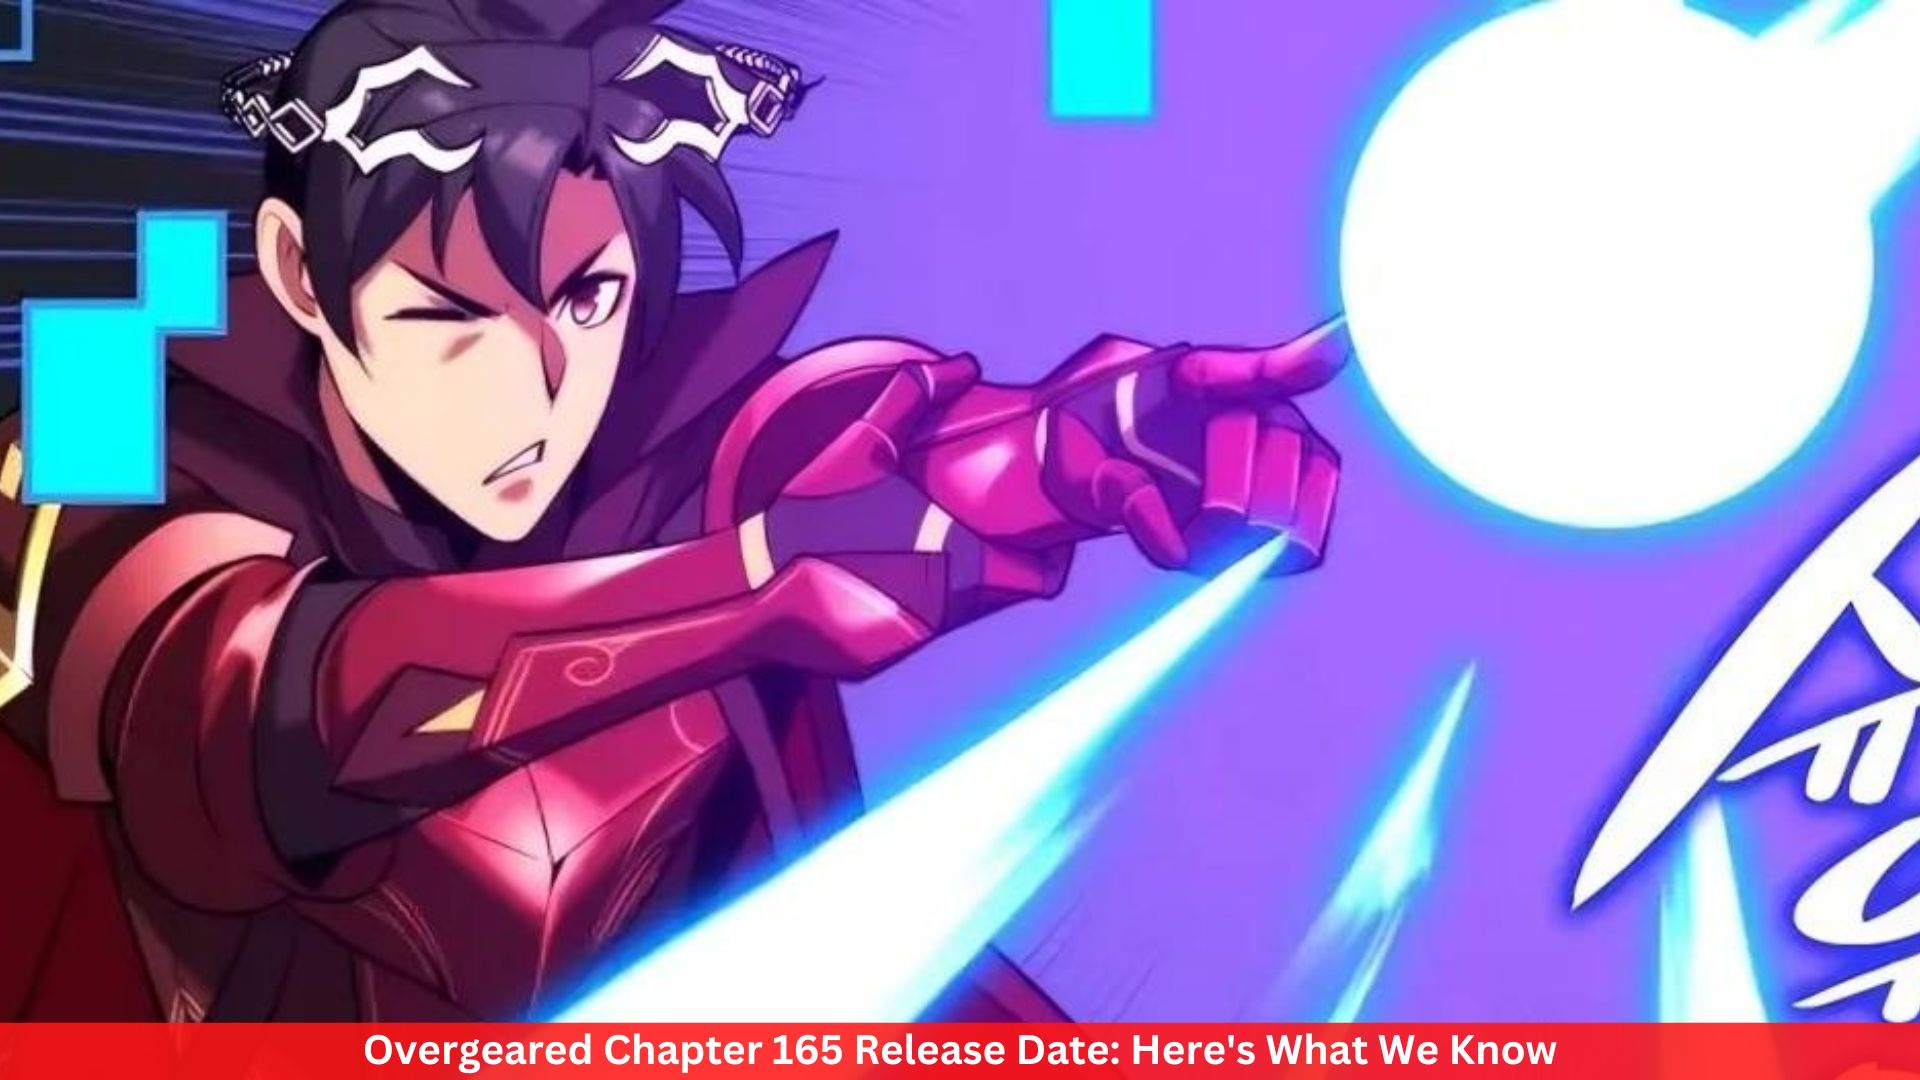 Overgeared Chapter 165 Release Date: Here's What We Know